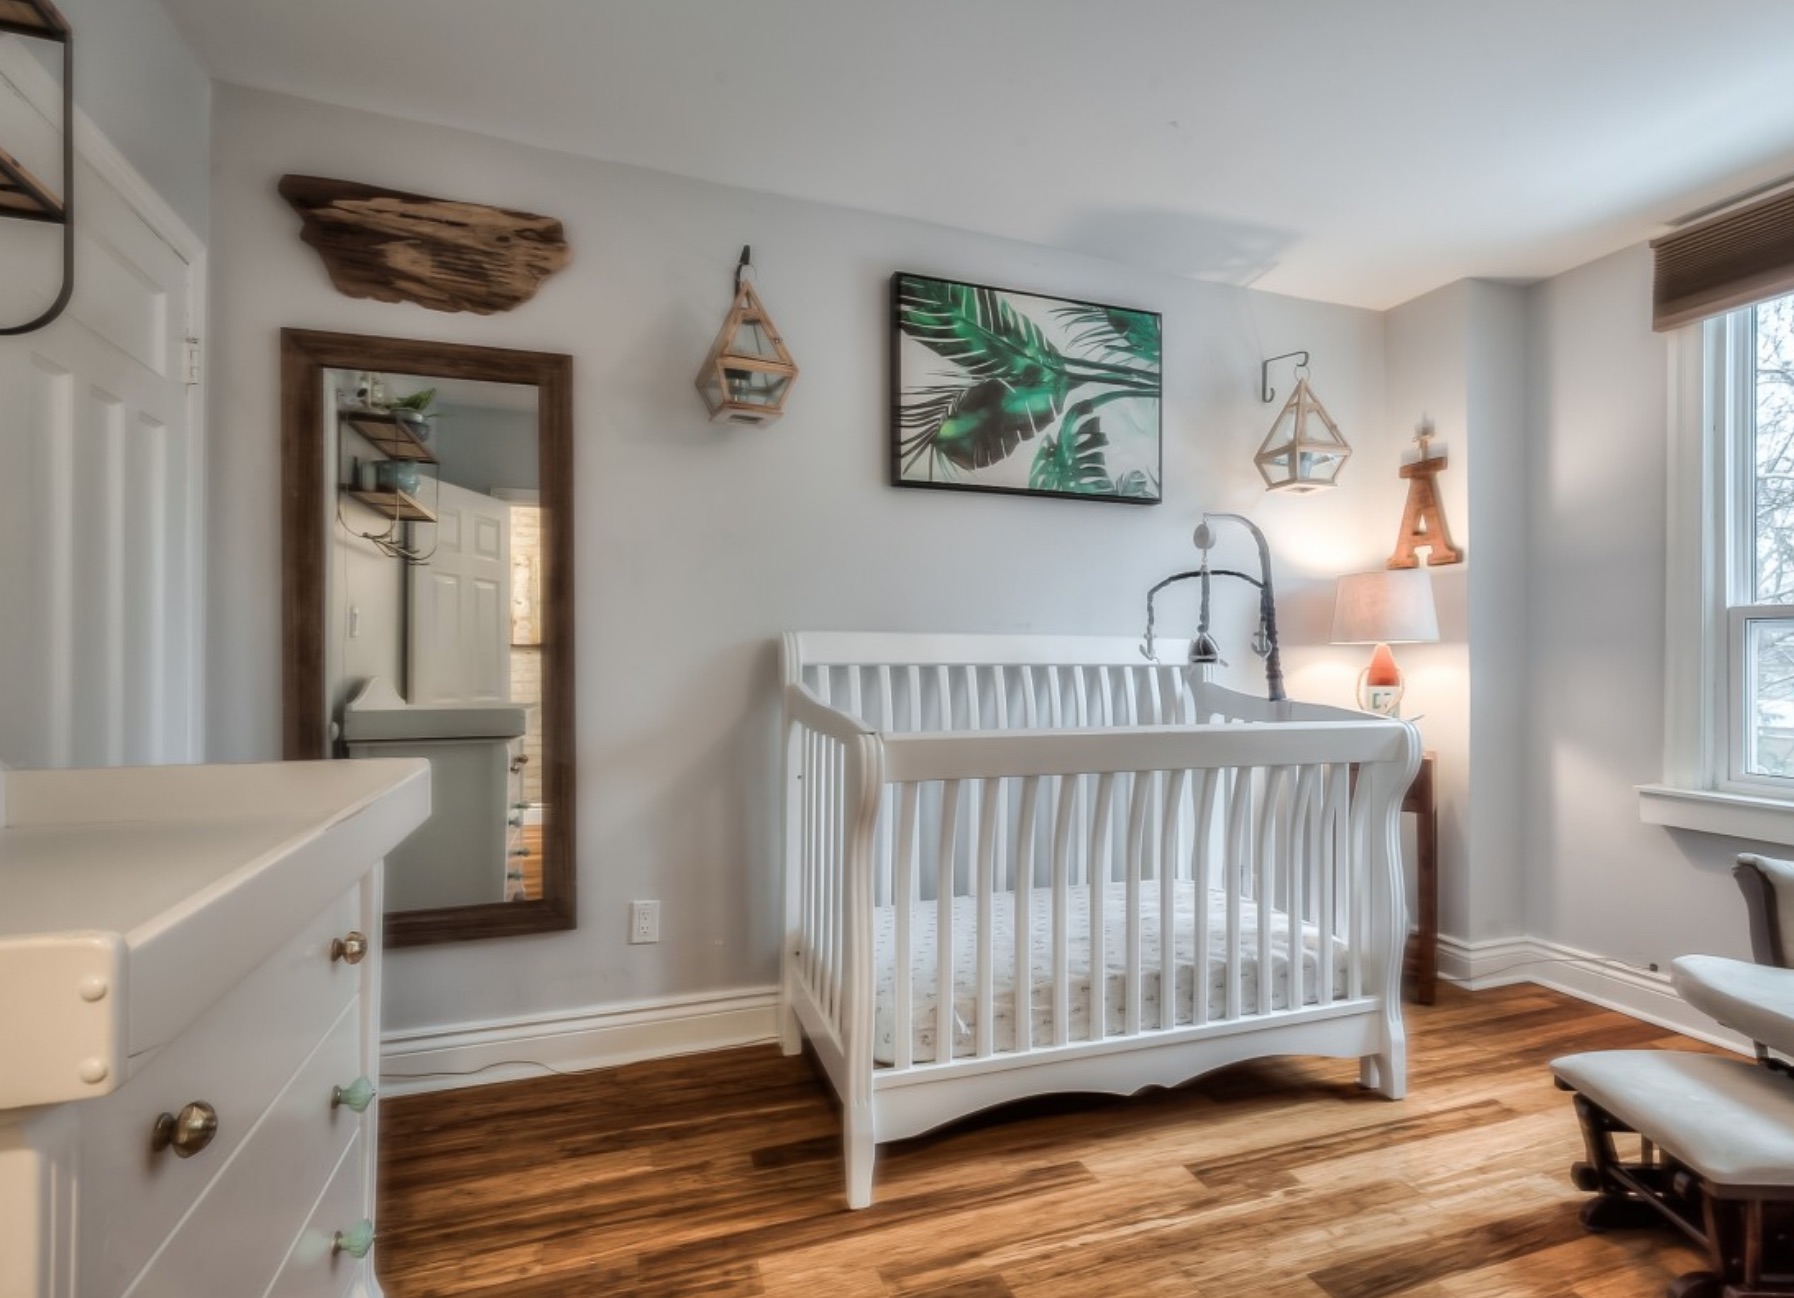 A second guest bedroom that was converted into a nursery